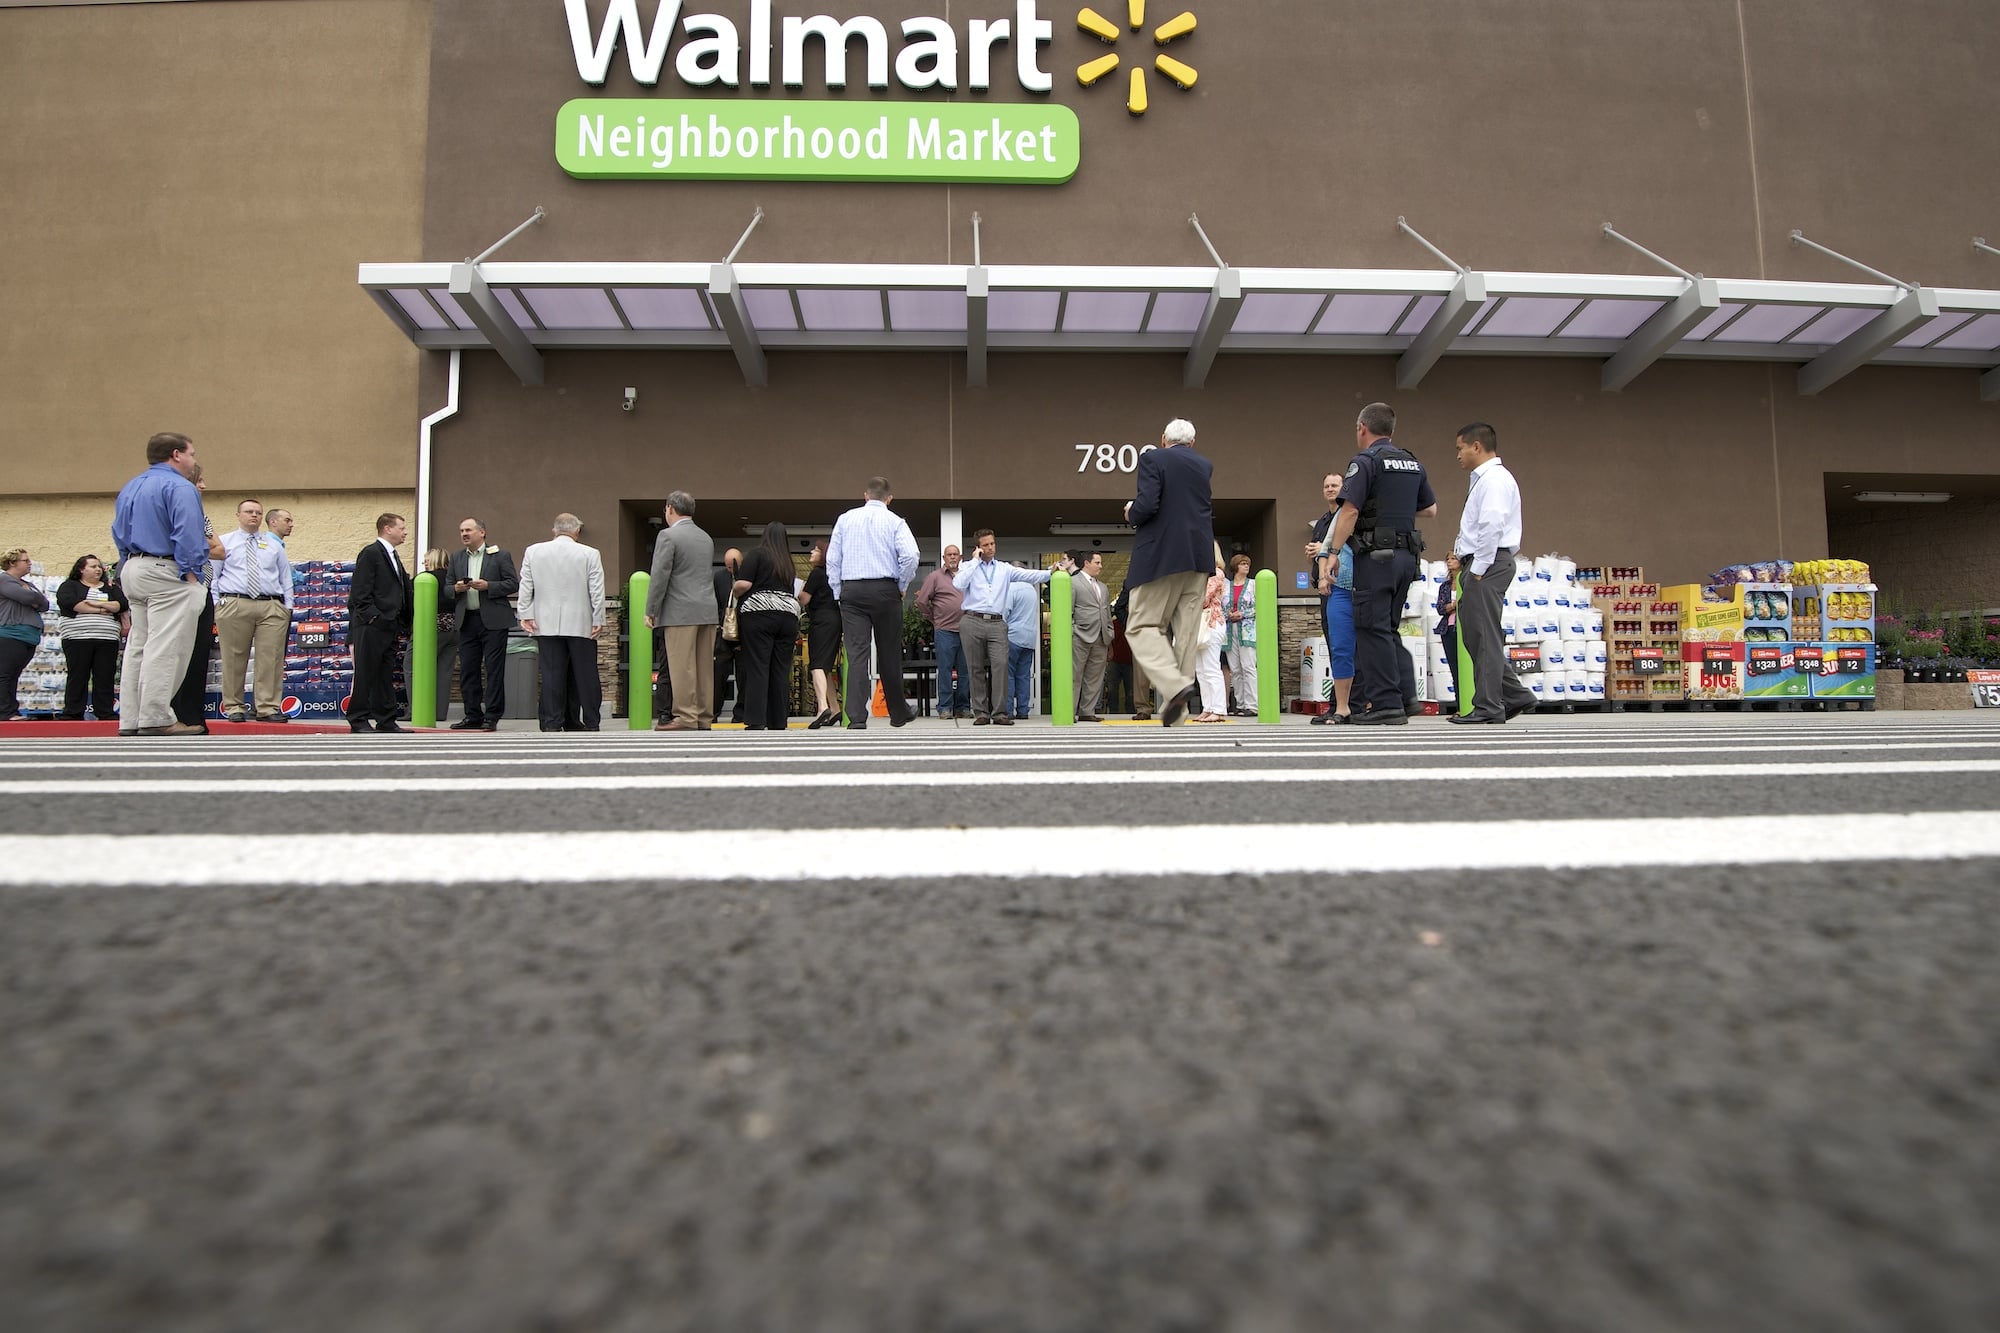 The Walmart Neighborhood Market in Vancouver PLaza opened July 17, 2013. Walmart announced Wednesday that the store will close April 19.